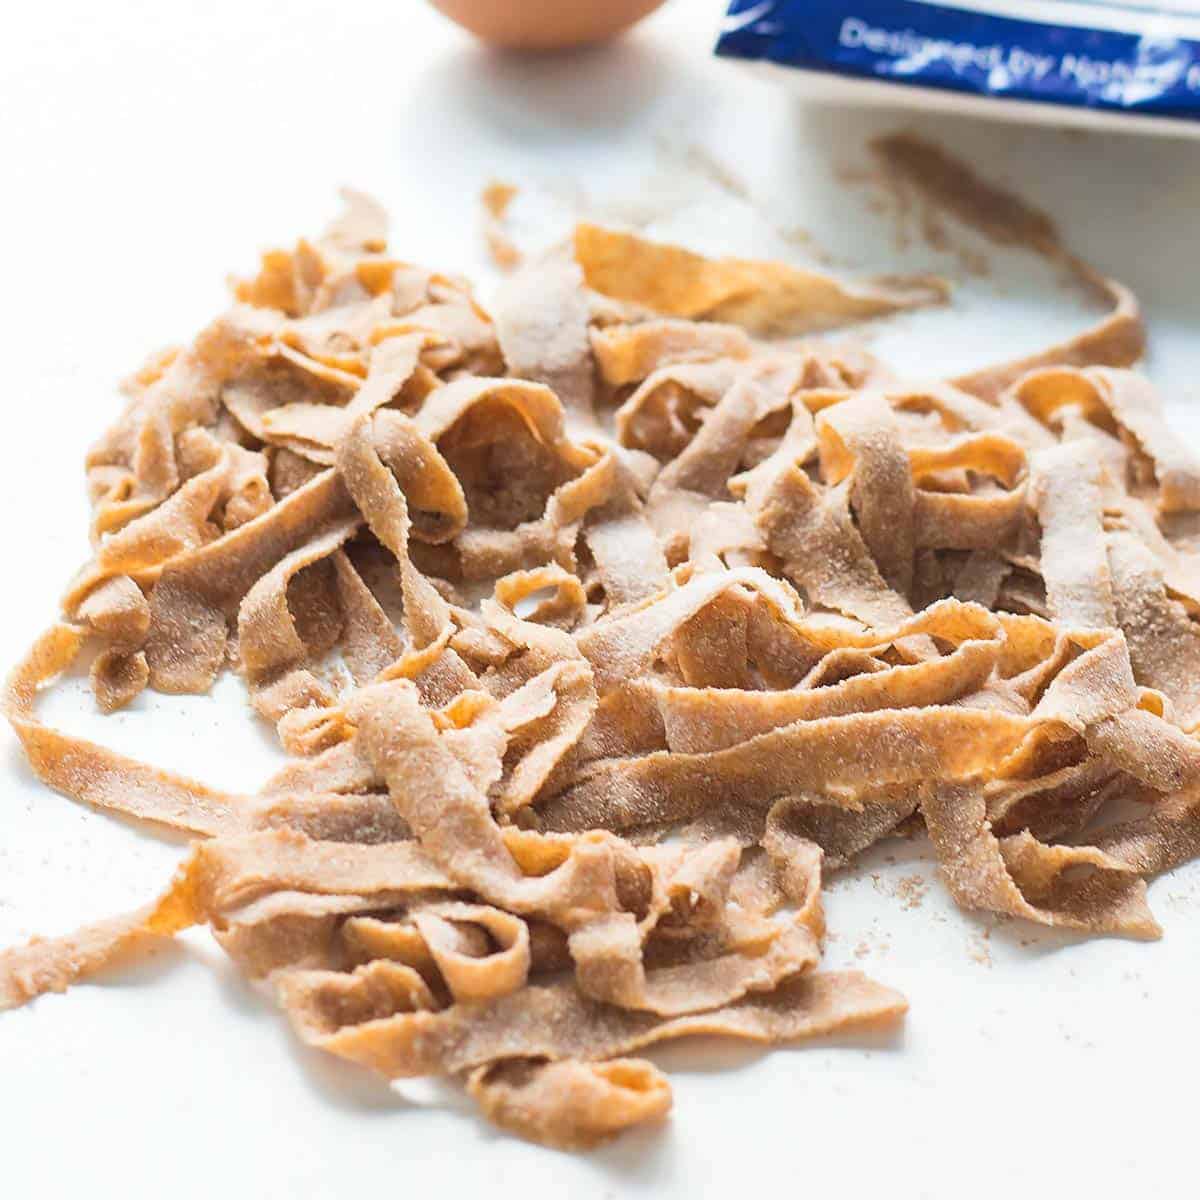 Hand-cut pappardelle recipe